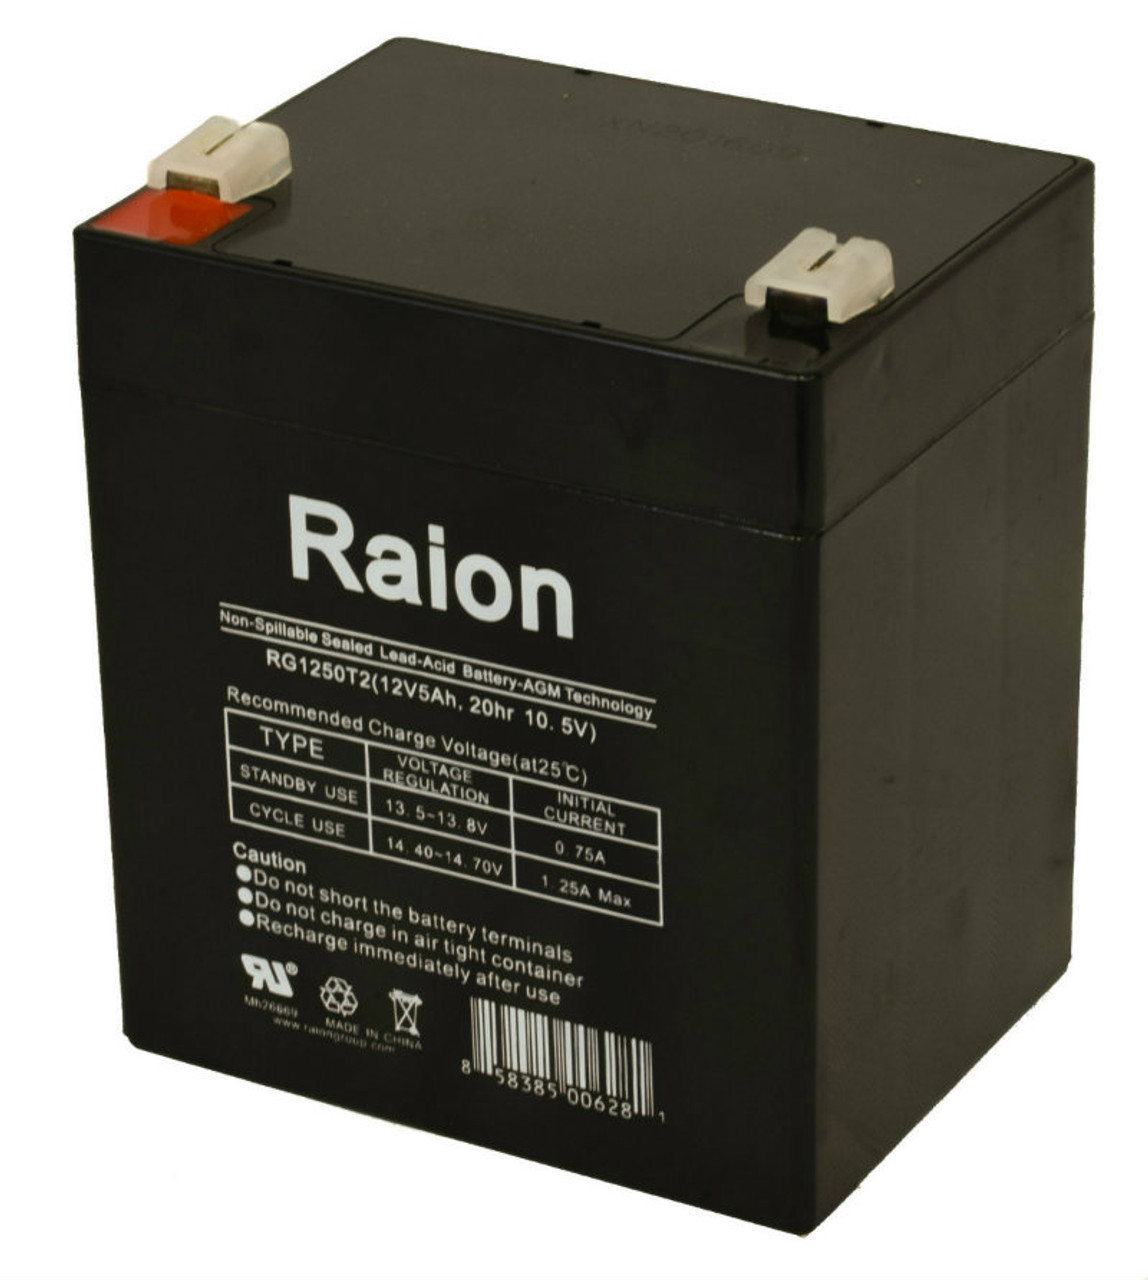 Raion Power RG1250T1 Replacement Alarm Security System Battery for Securitron PB2